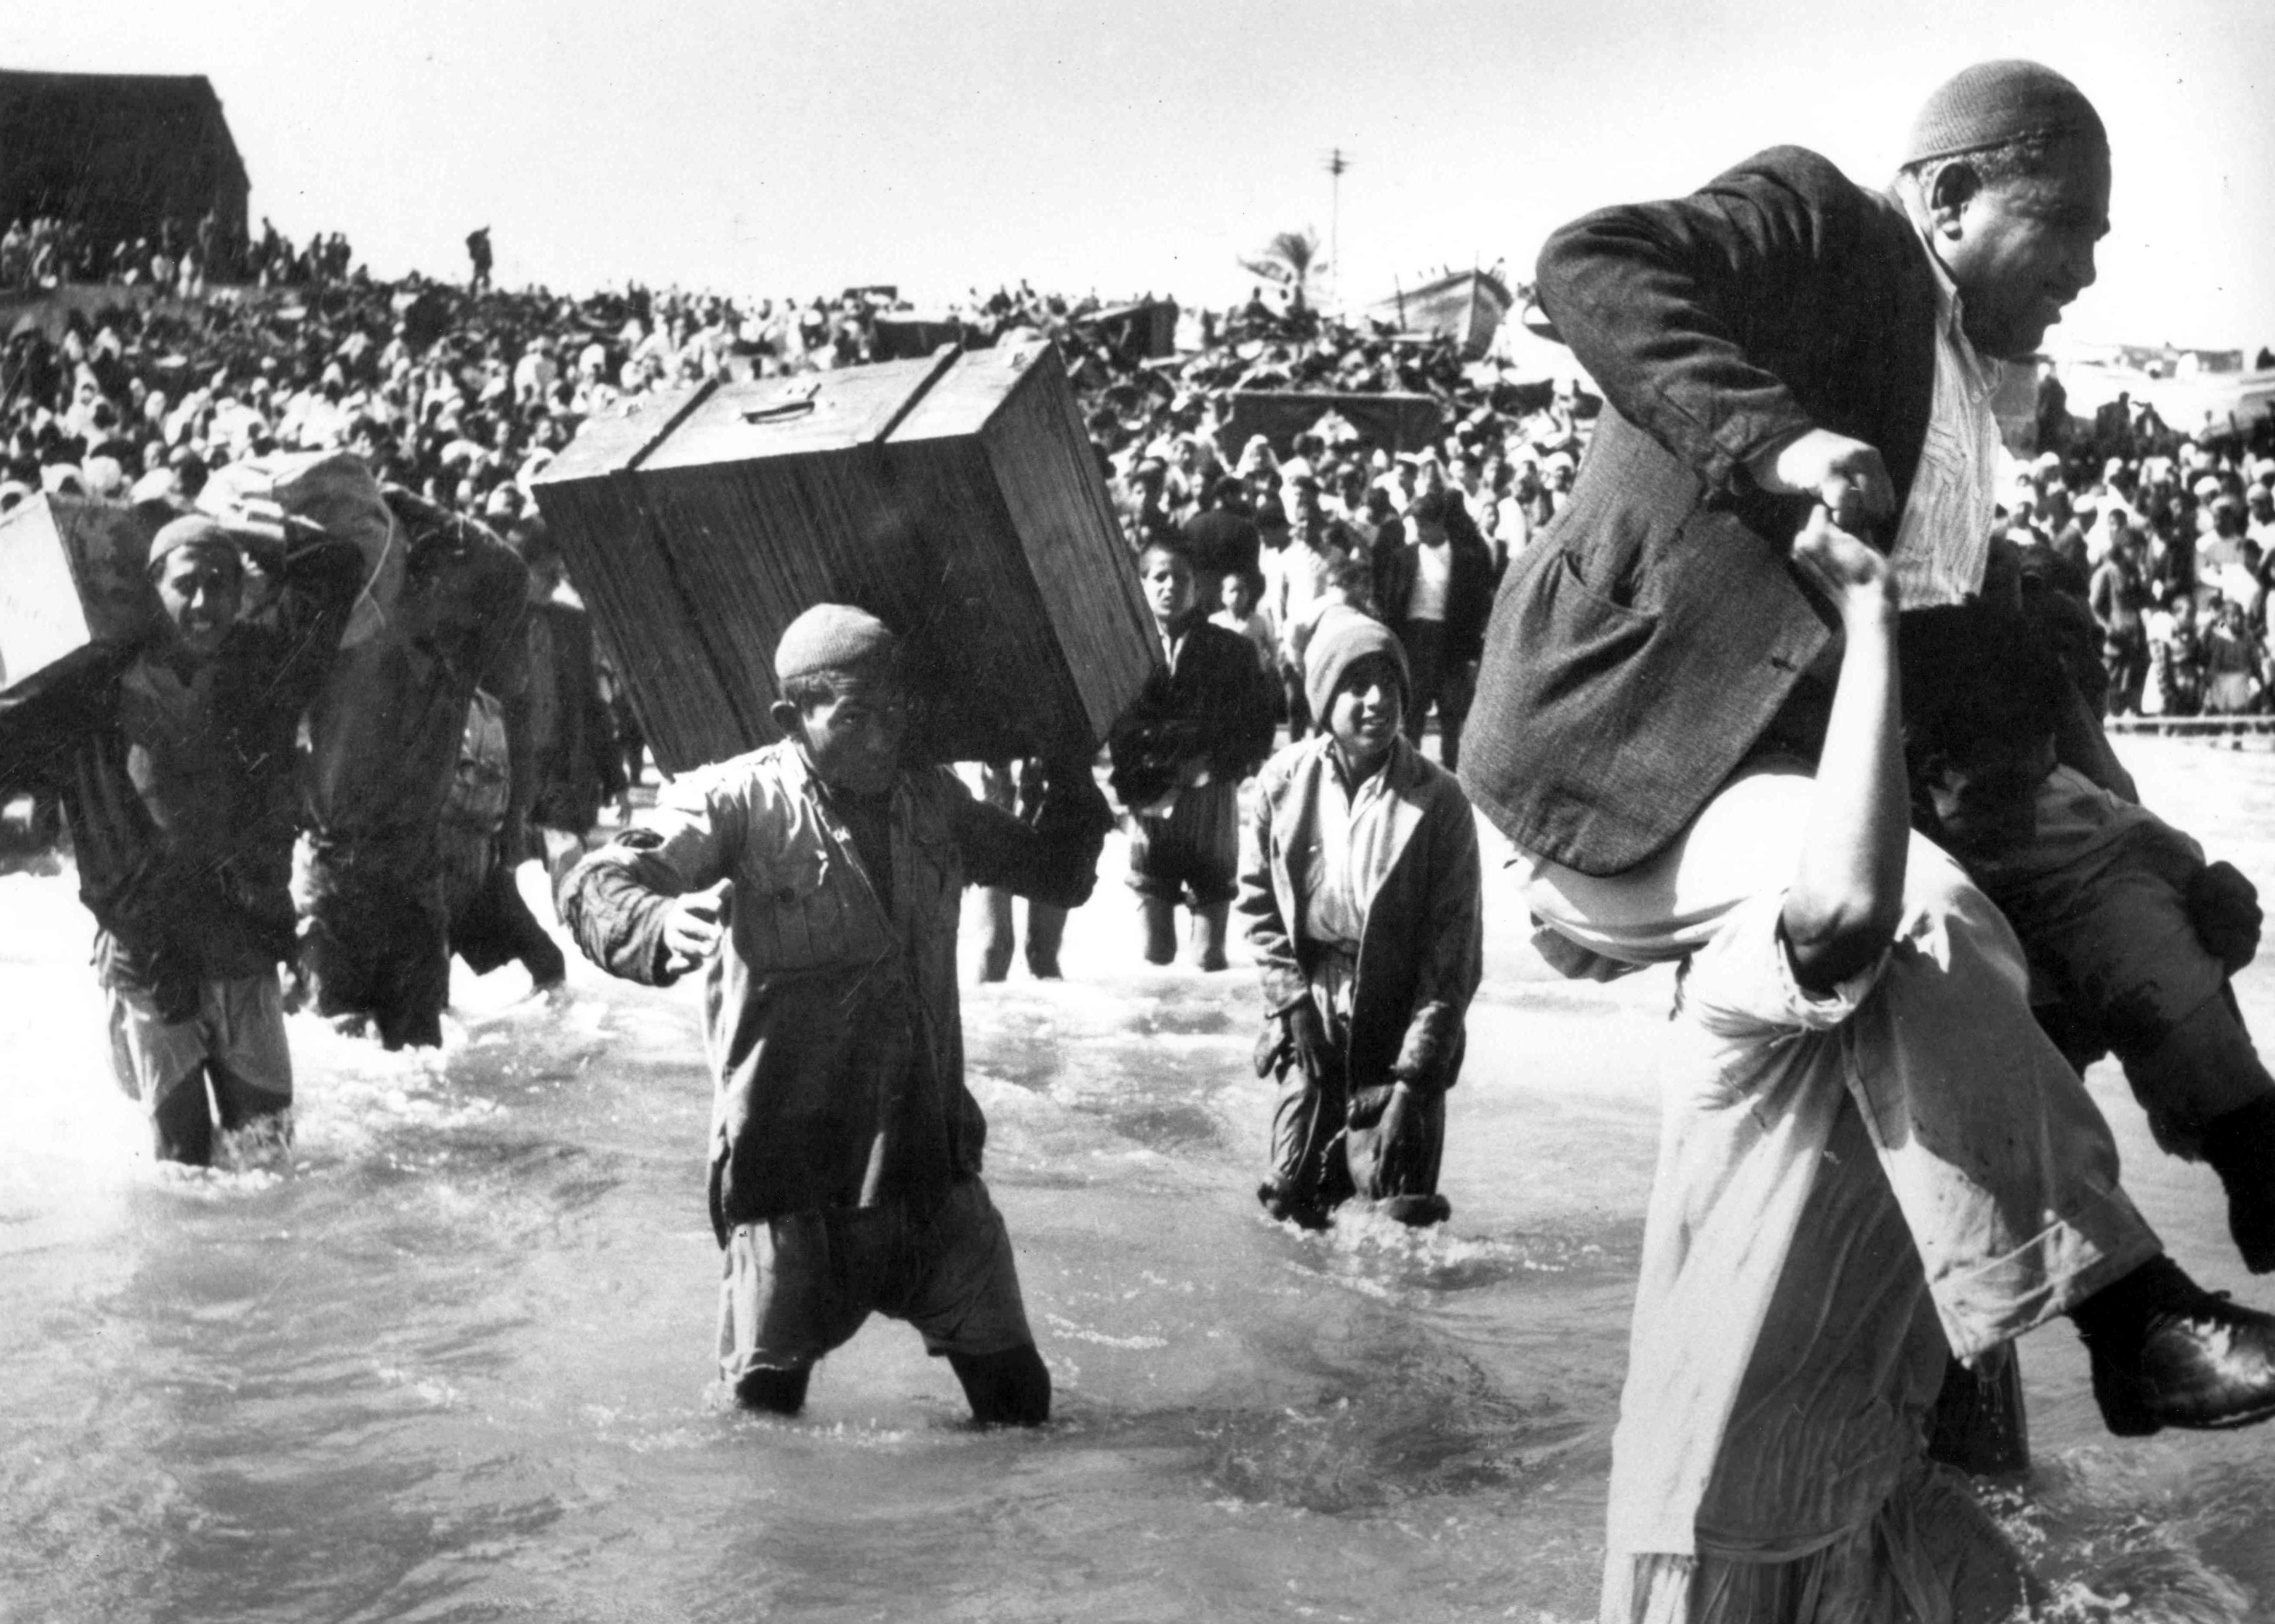 Photo above: Palestinians driven from their homes by Israeli forces and fleeing via the sea at Acre, 1948. Photo by Pictures From History/Universal Images Group via Getty Images.